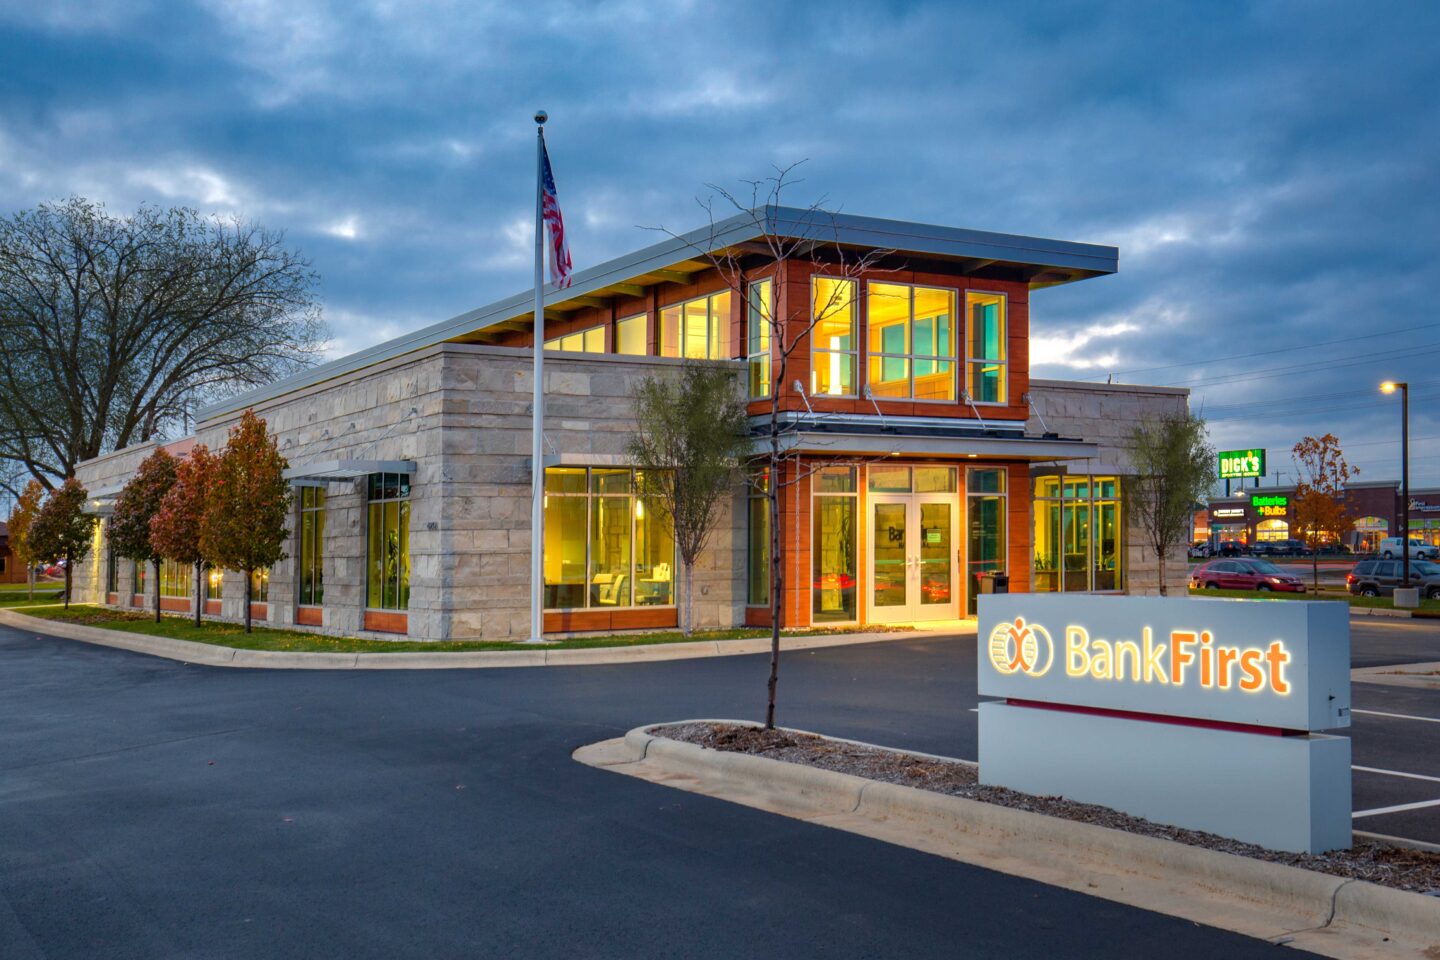 Exterior at dusk of stone-clad bank building